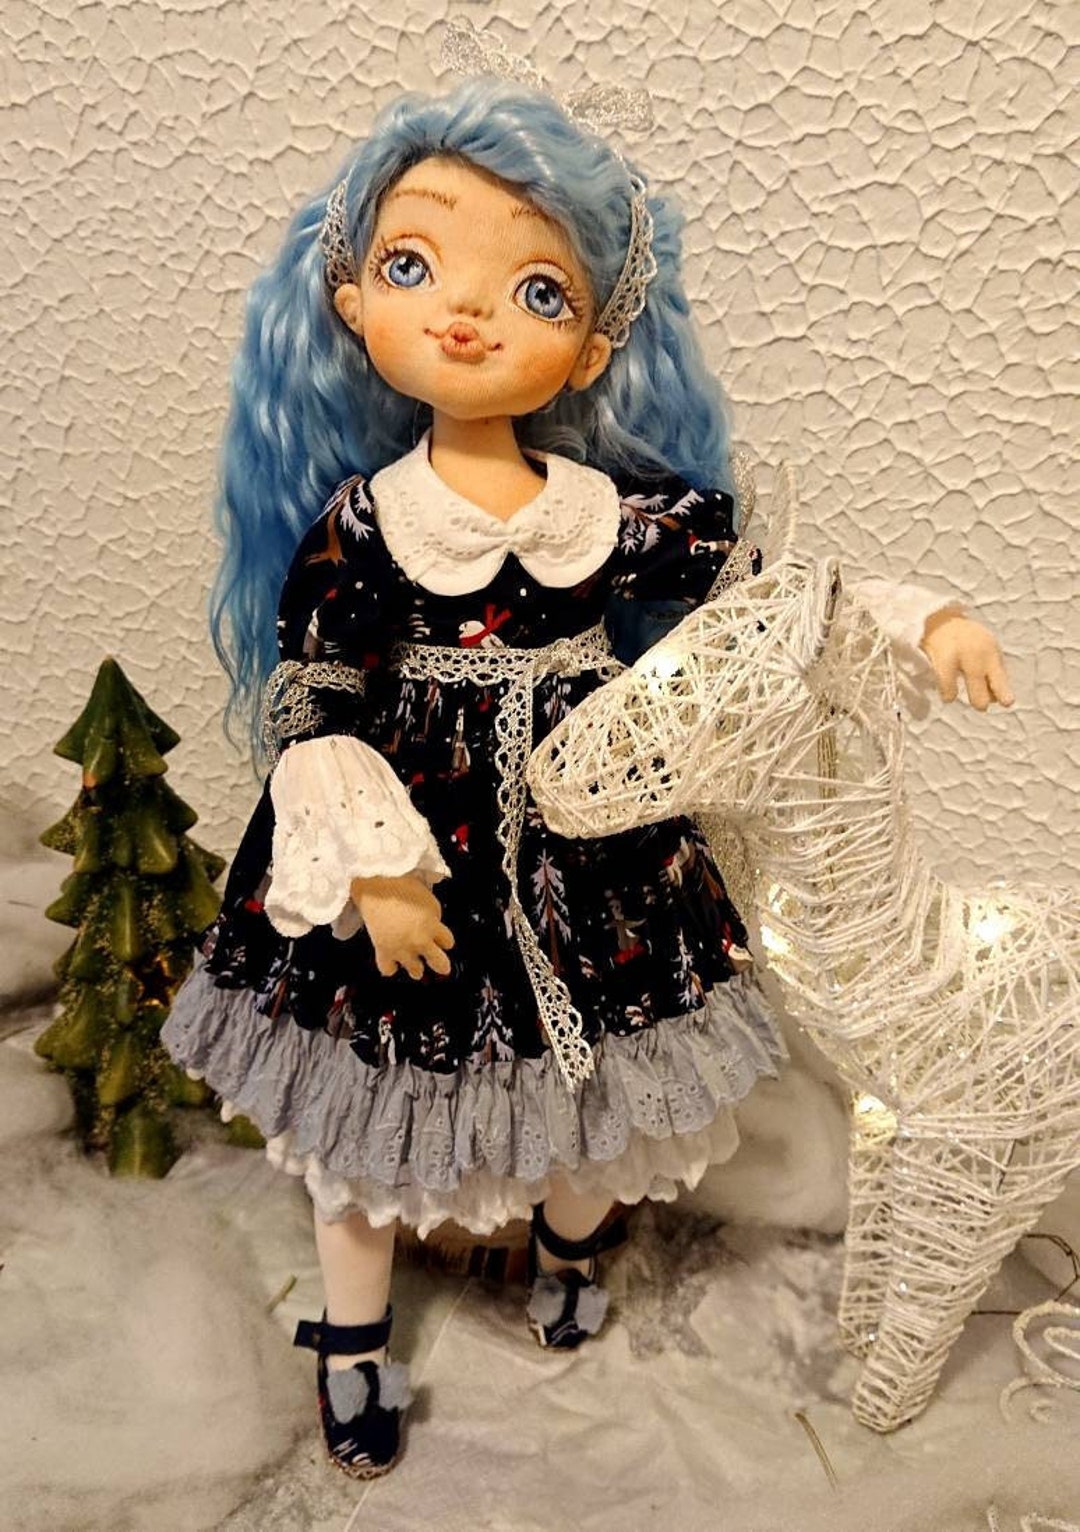 Malvina, Handmade Doll. Art Doll. Made With Love for You. 